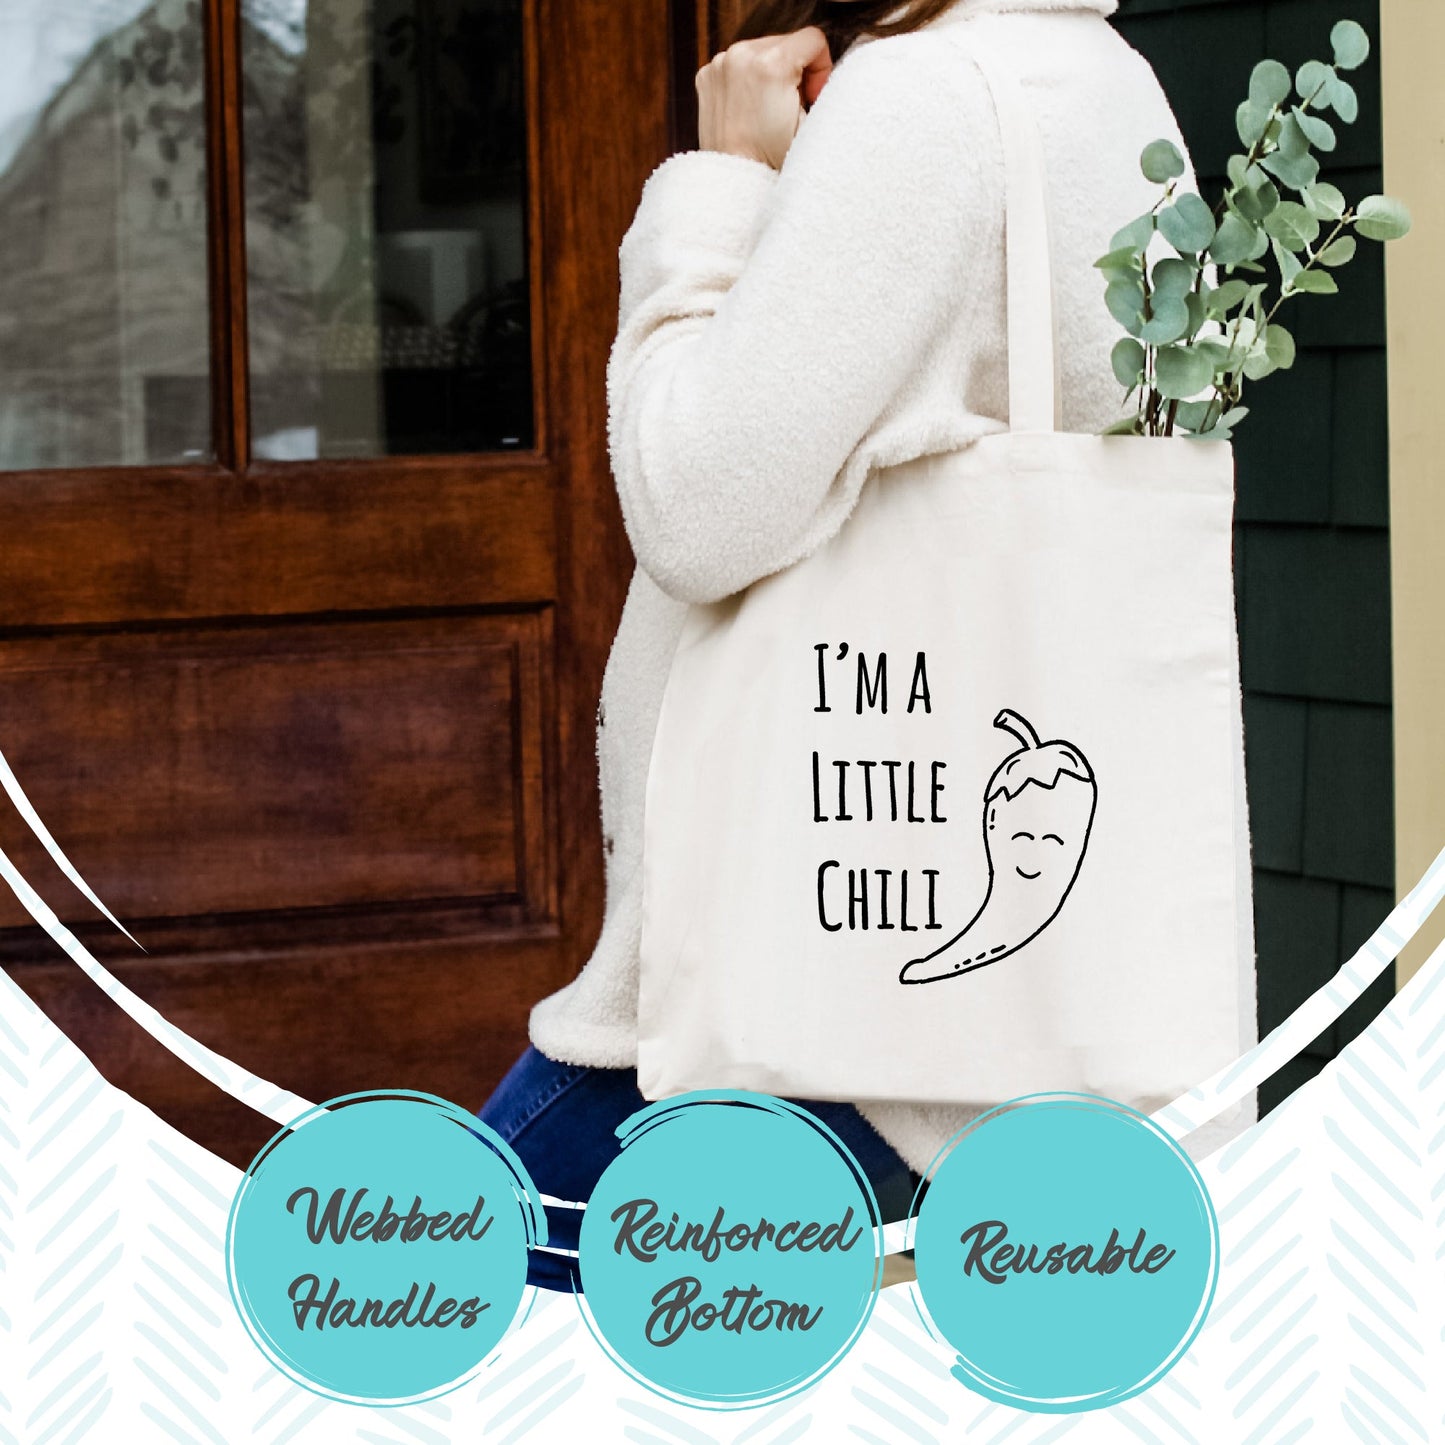 Ain't No Mountain High Enough - Tote Bag - MoonlightMakers